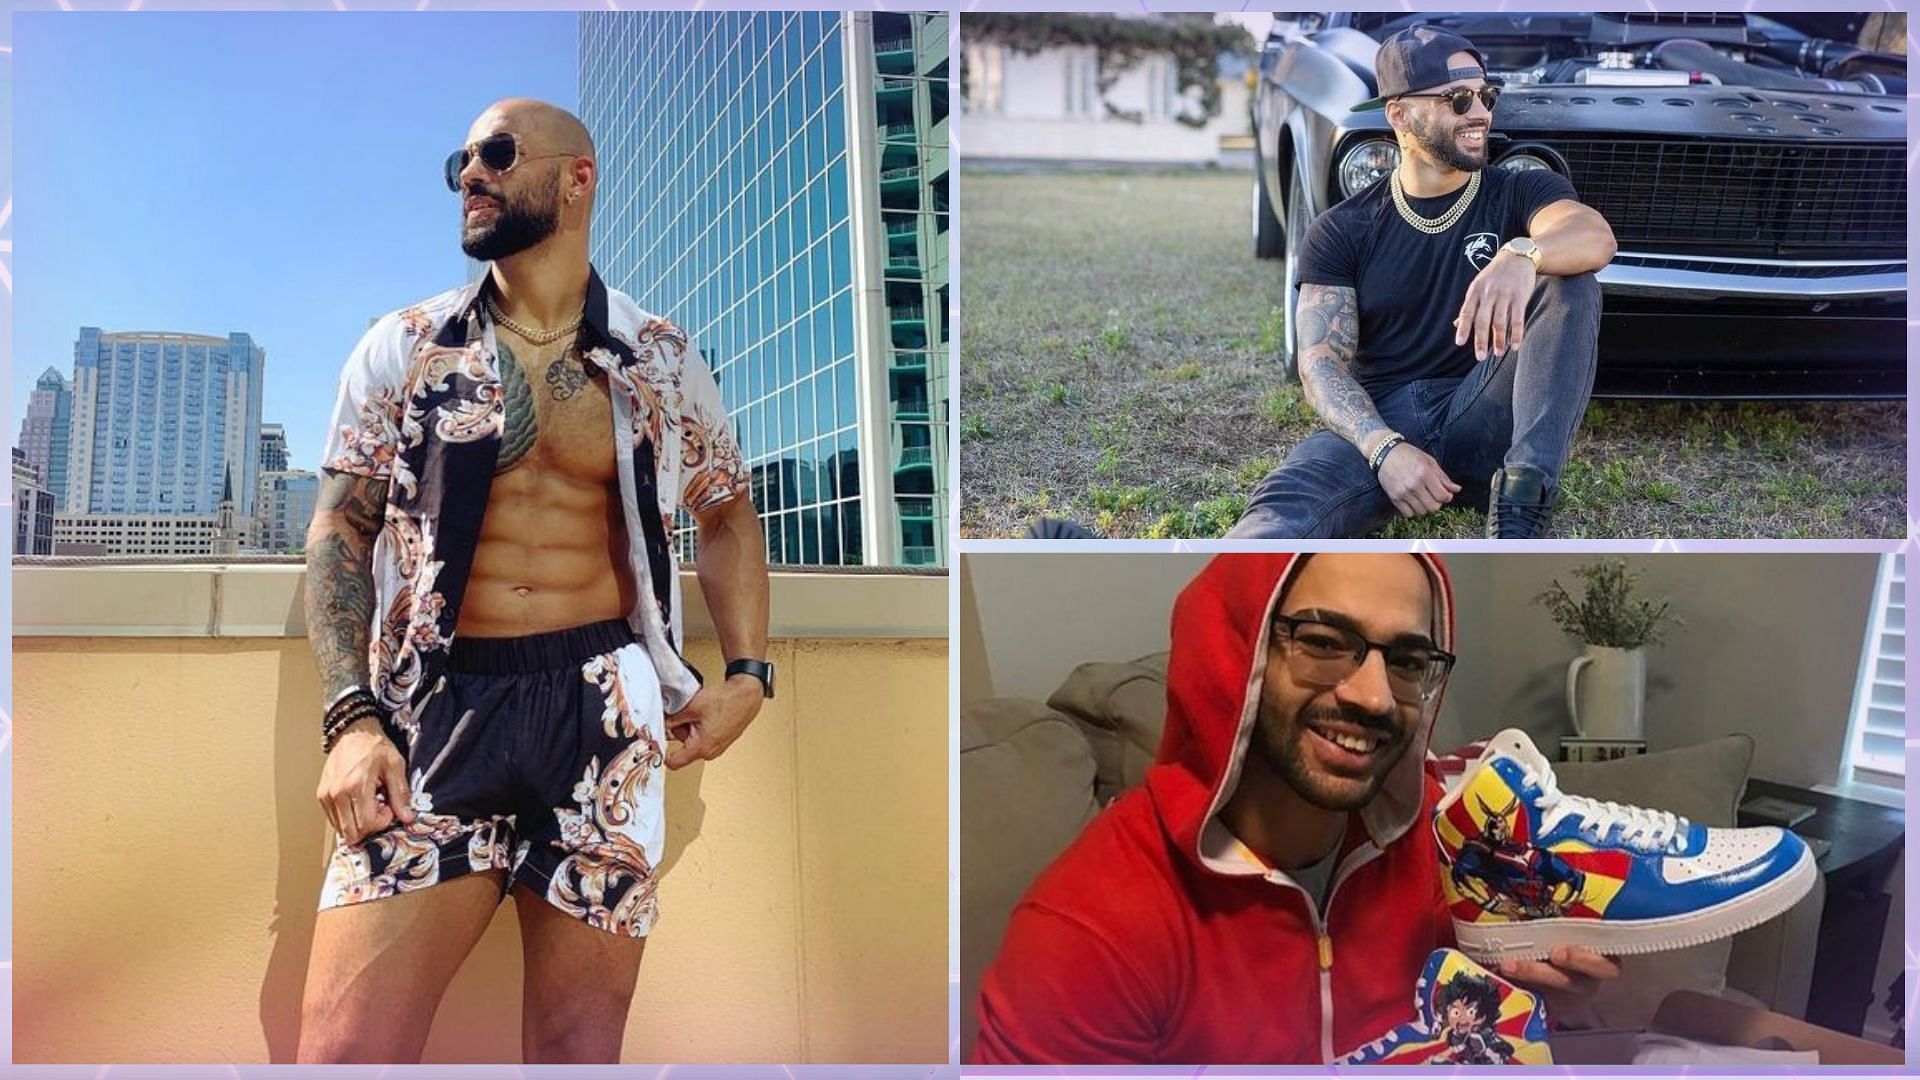 Ricochet is dating a WWE ring announcer.